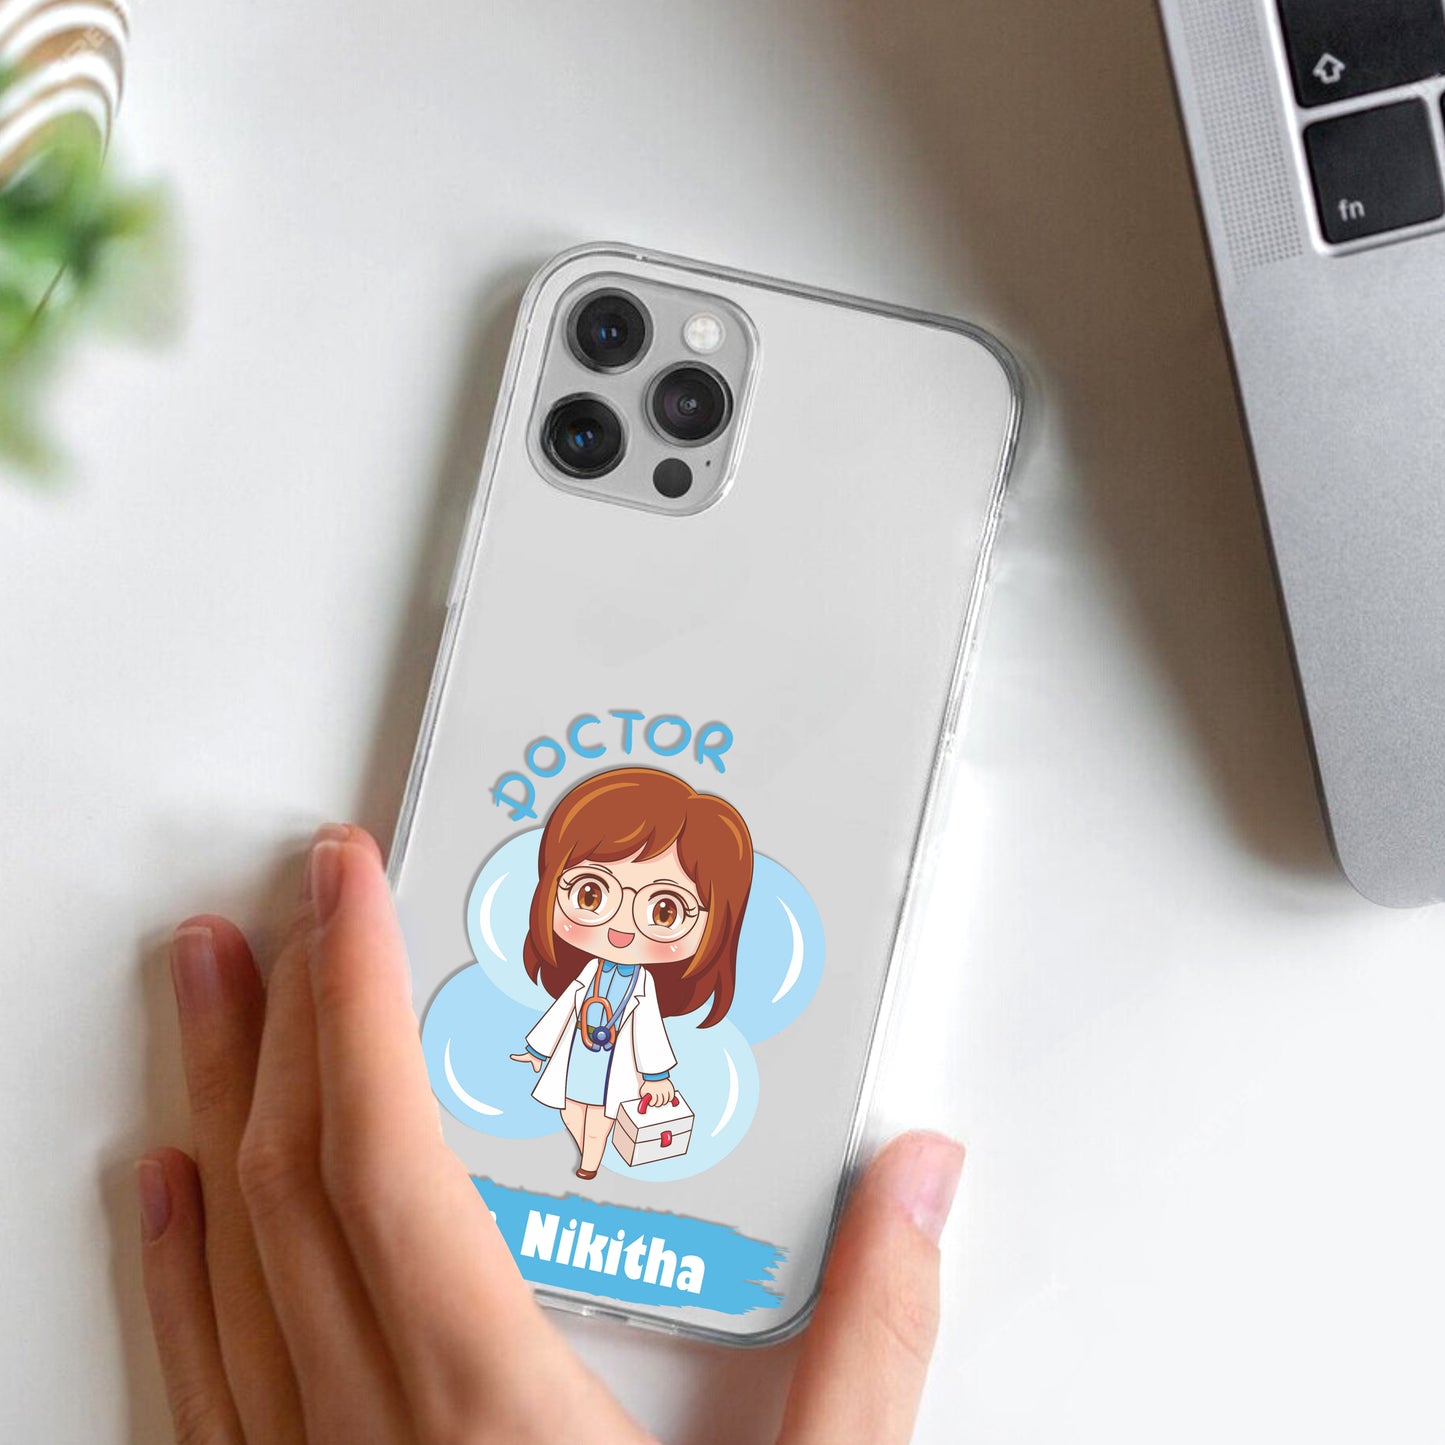 Future Doctor Customize Transparent Silicon Case For iPhone